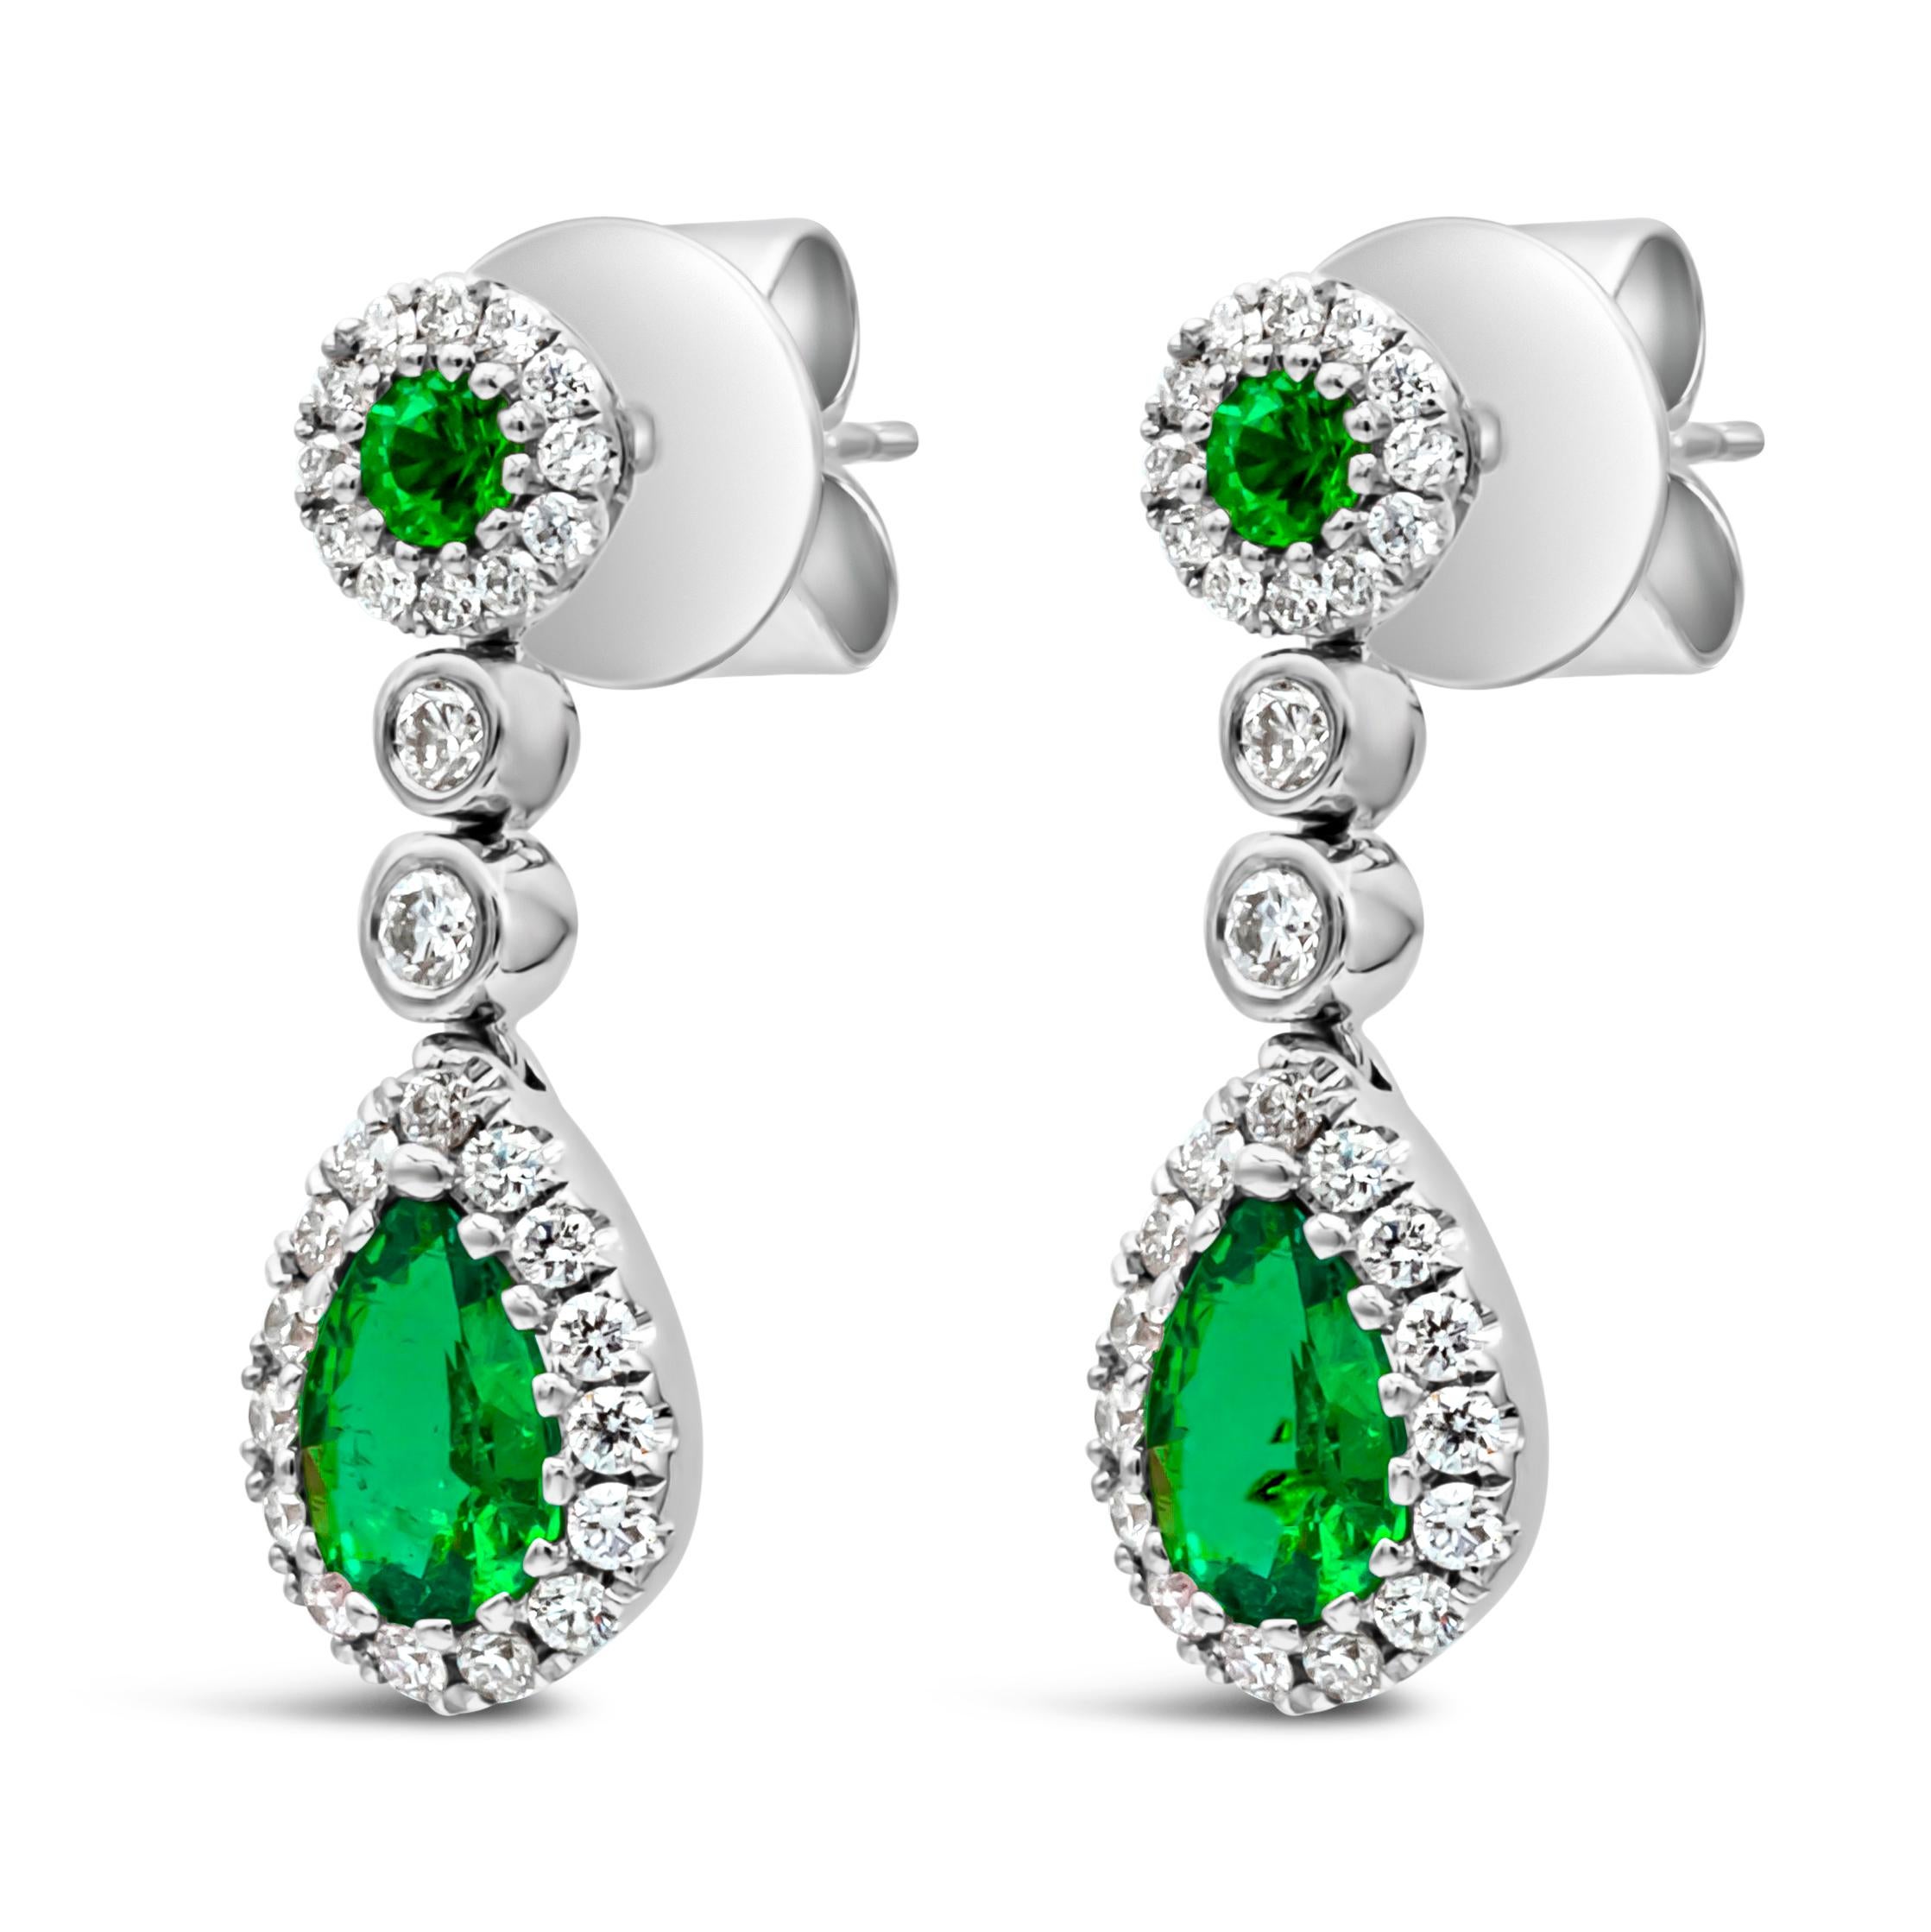 Contemporary 0.66 Carats Total Mixed Cut Colombian Green Emerald & Diamond Dangle Earrings For Sale